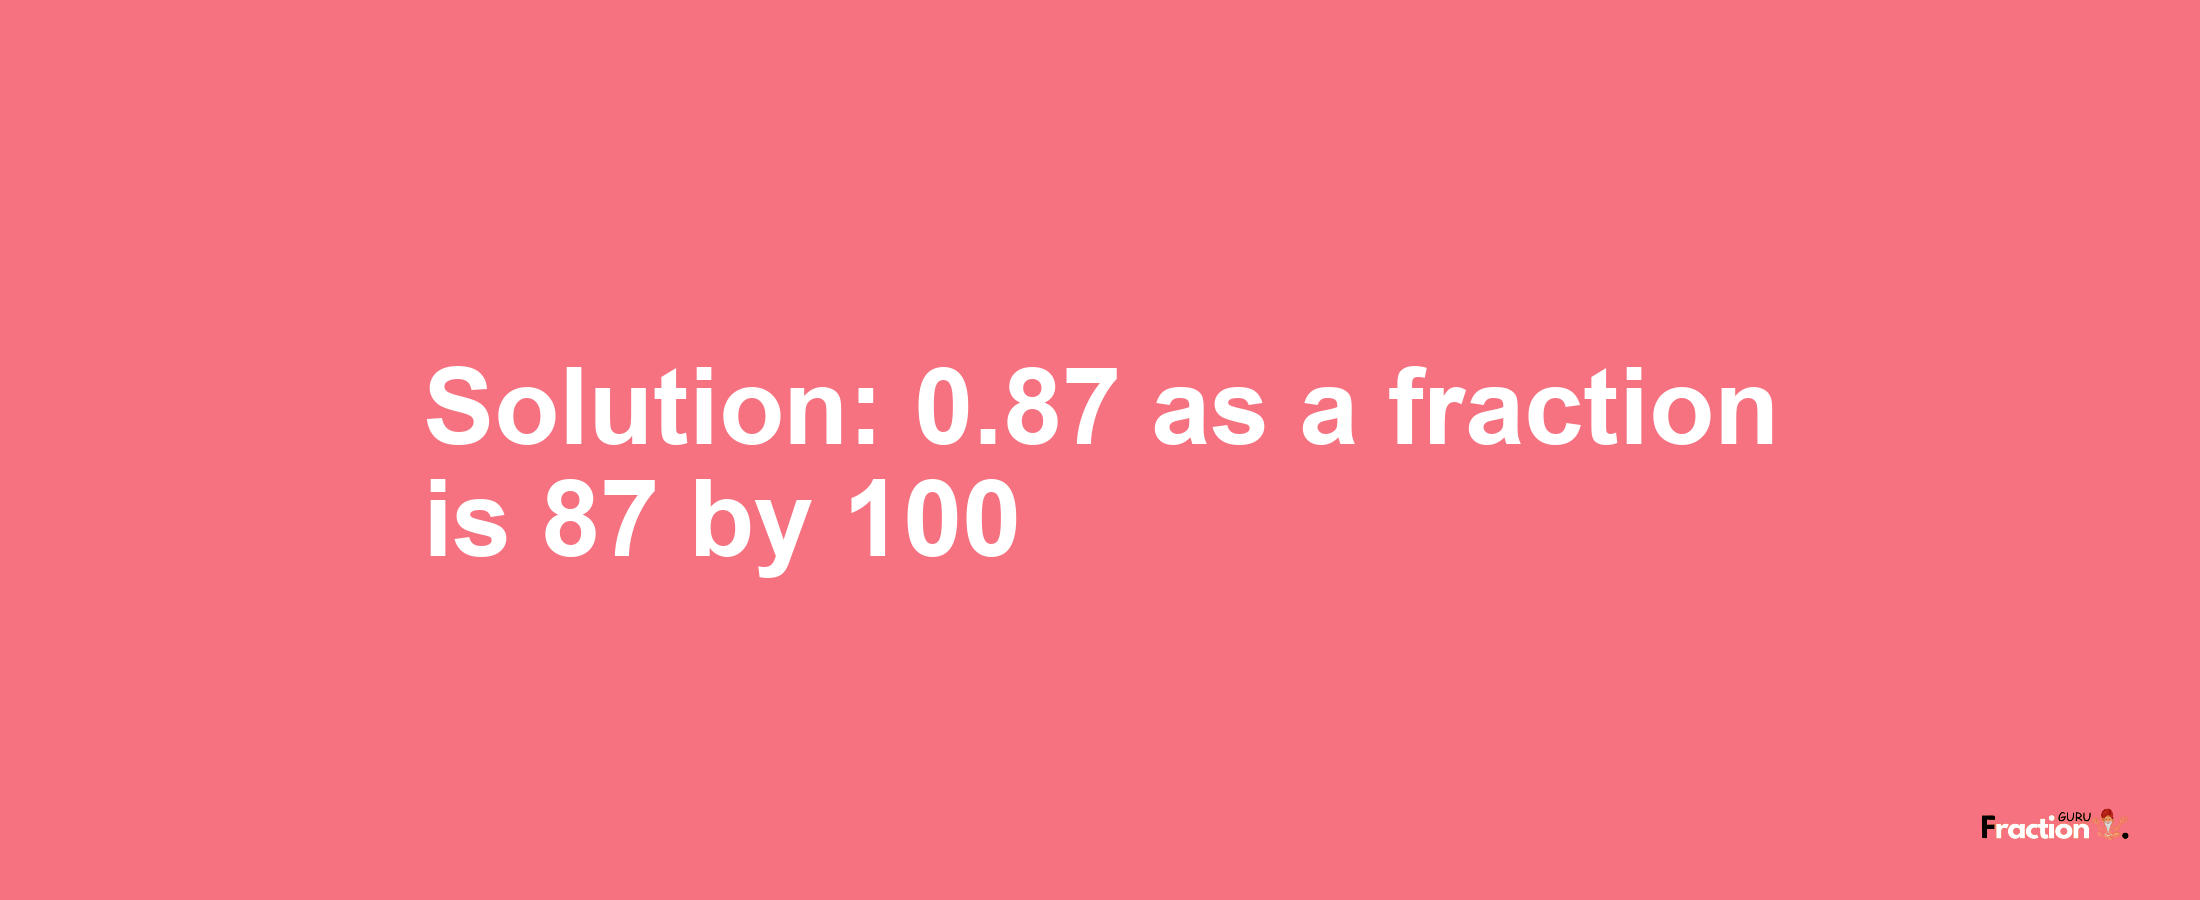 Solution:0.87 as a fraction is 87/100